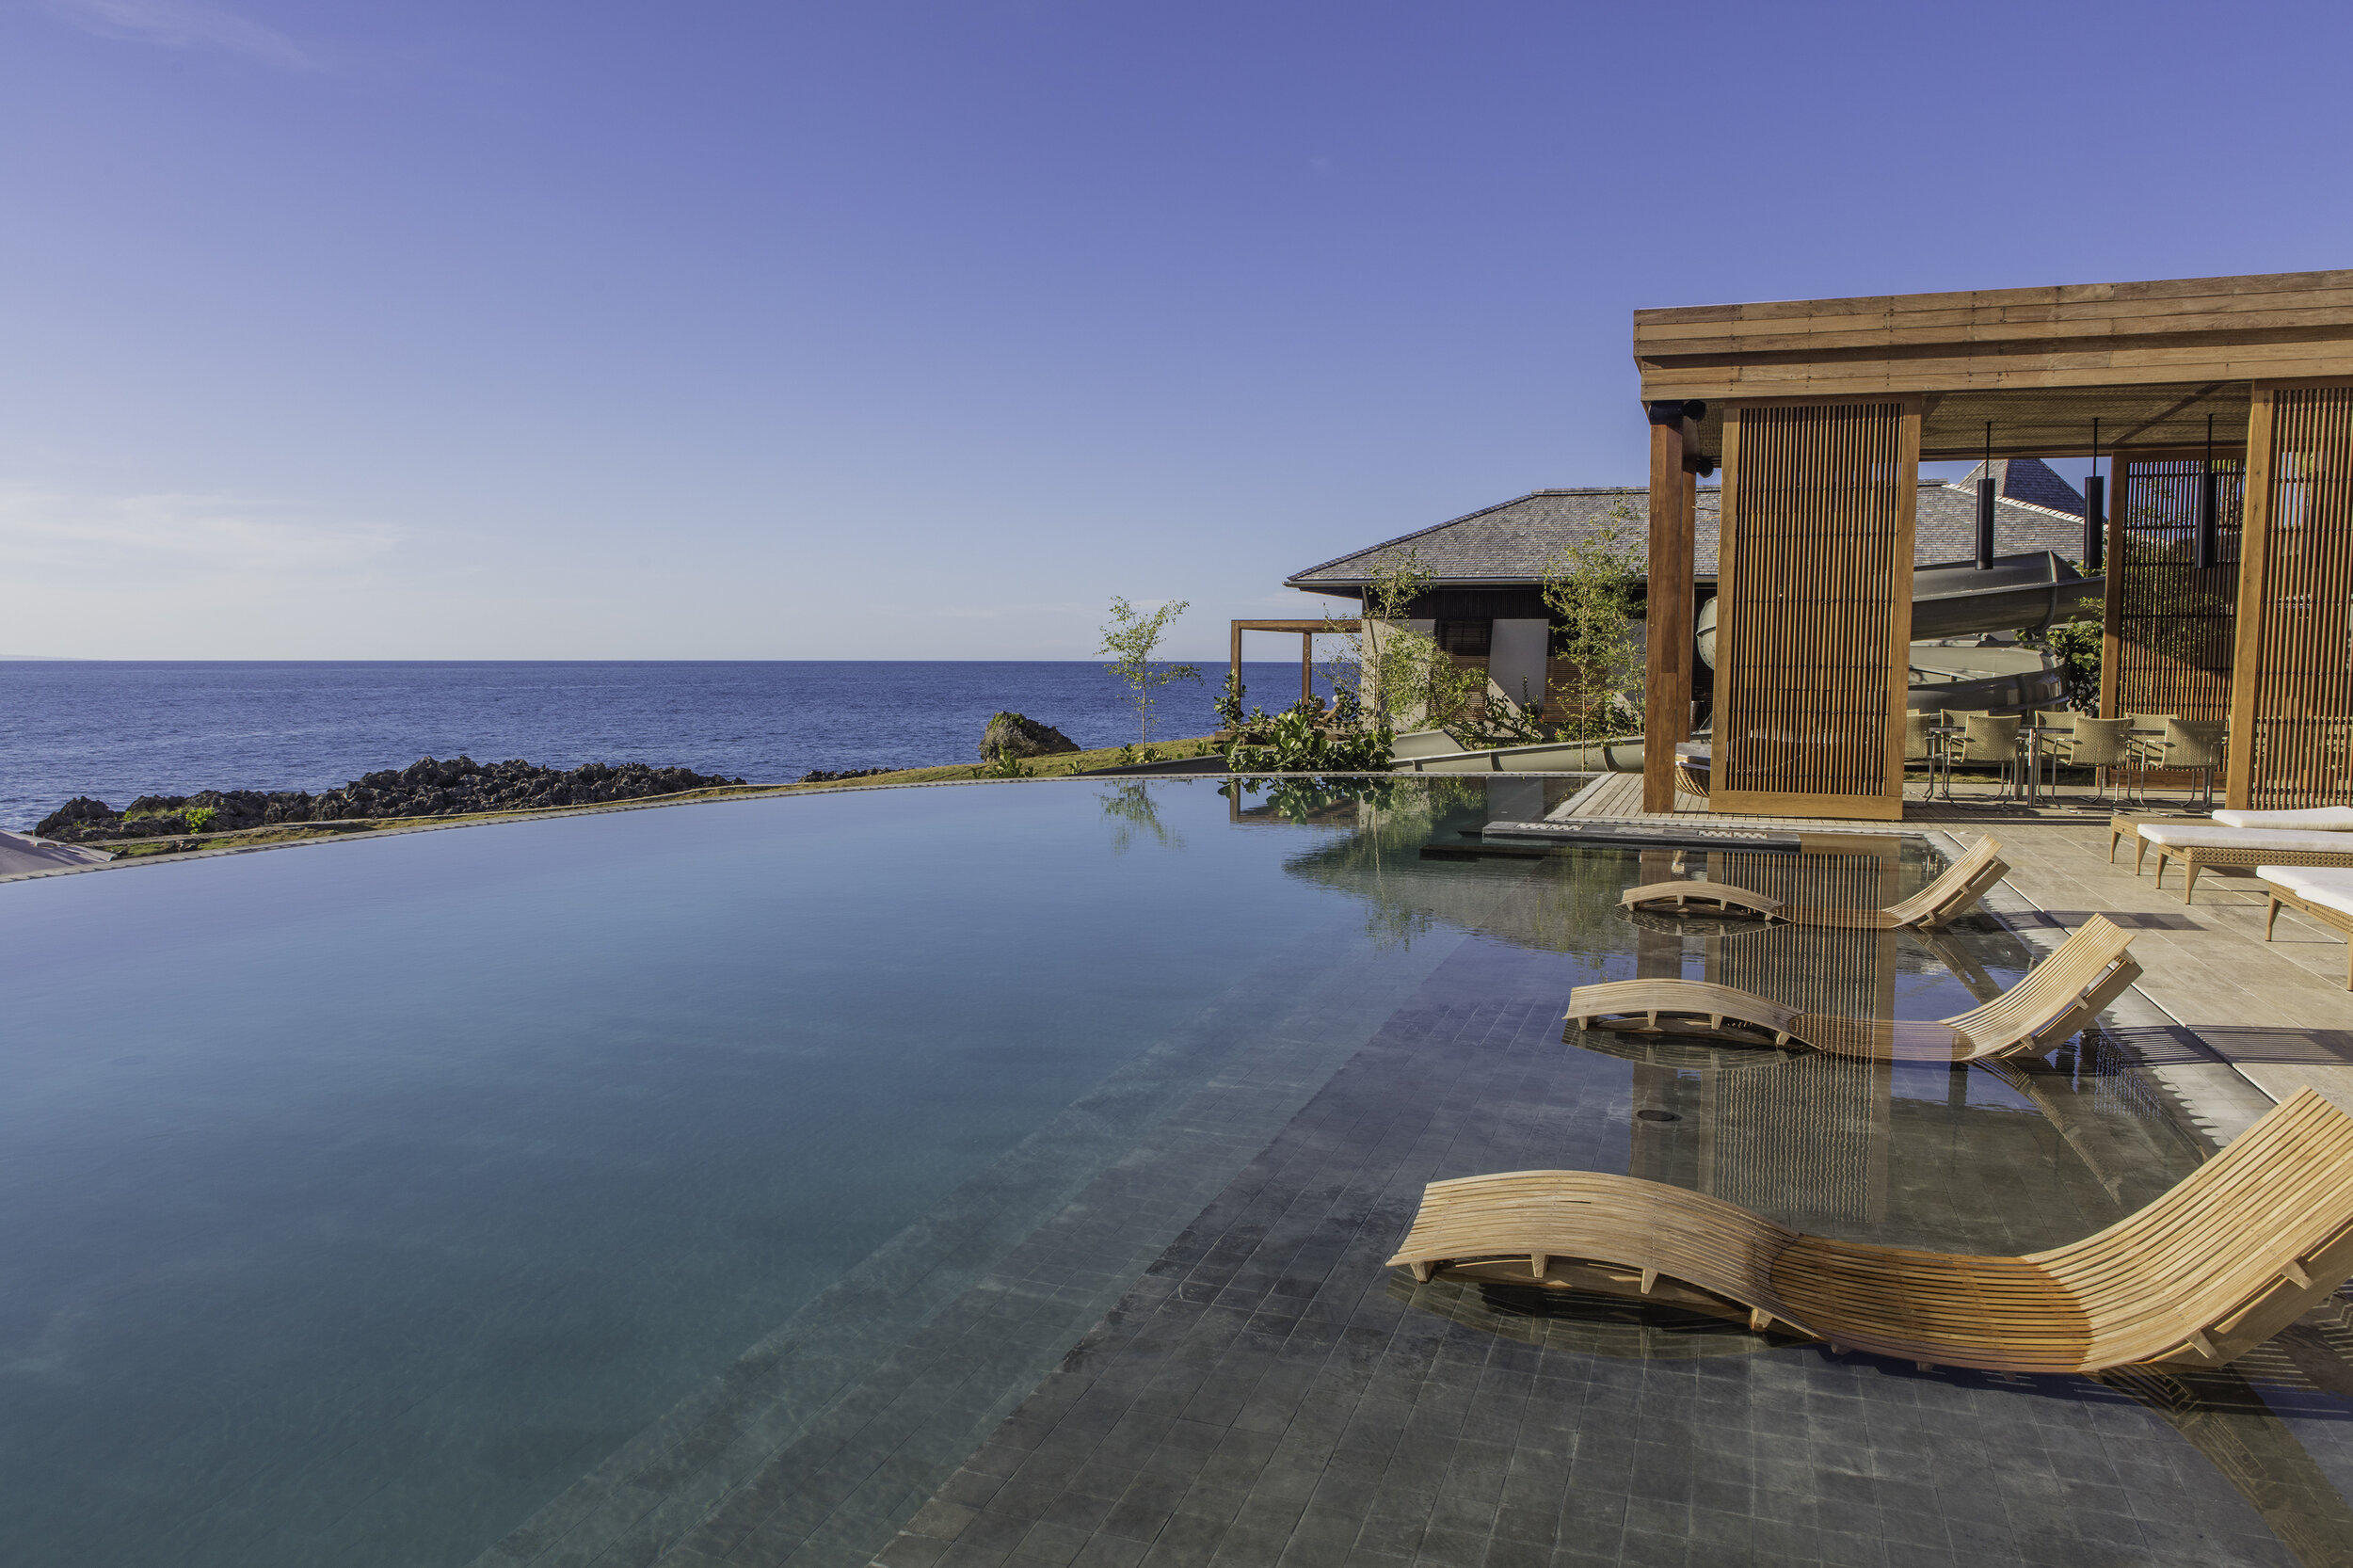   Pool view from the Amber villa (photo credit: ÀNI Private Resorts)  